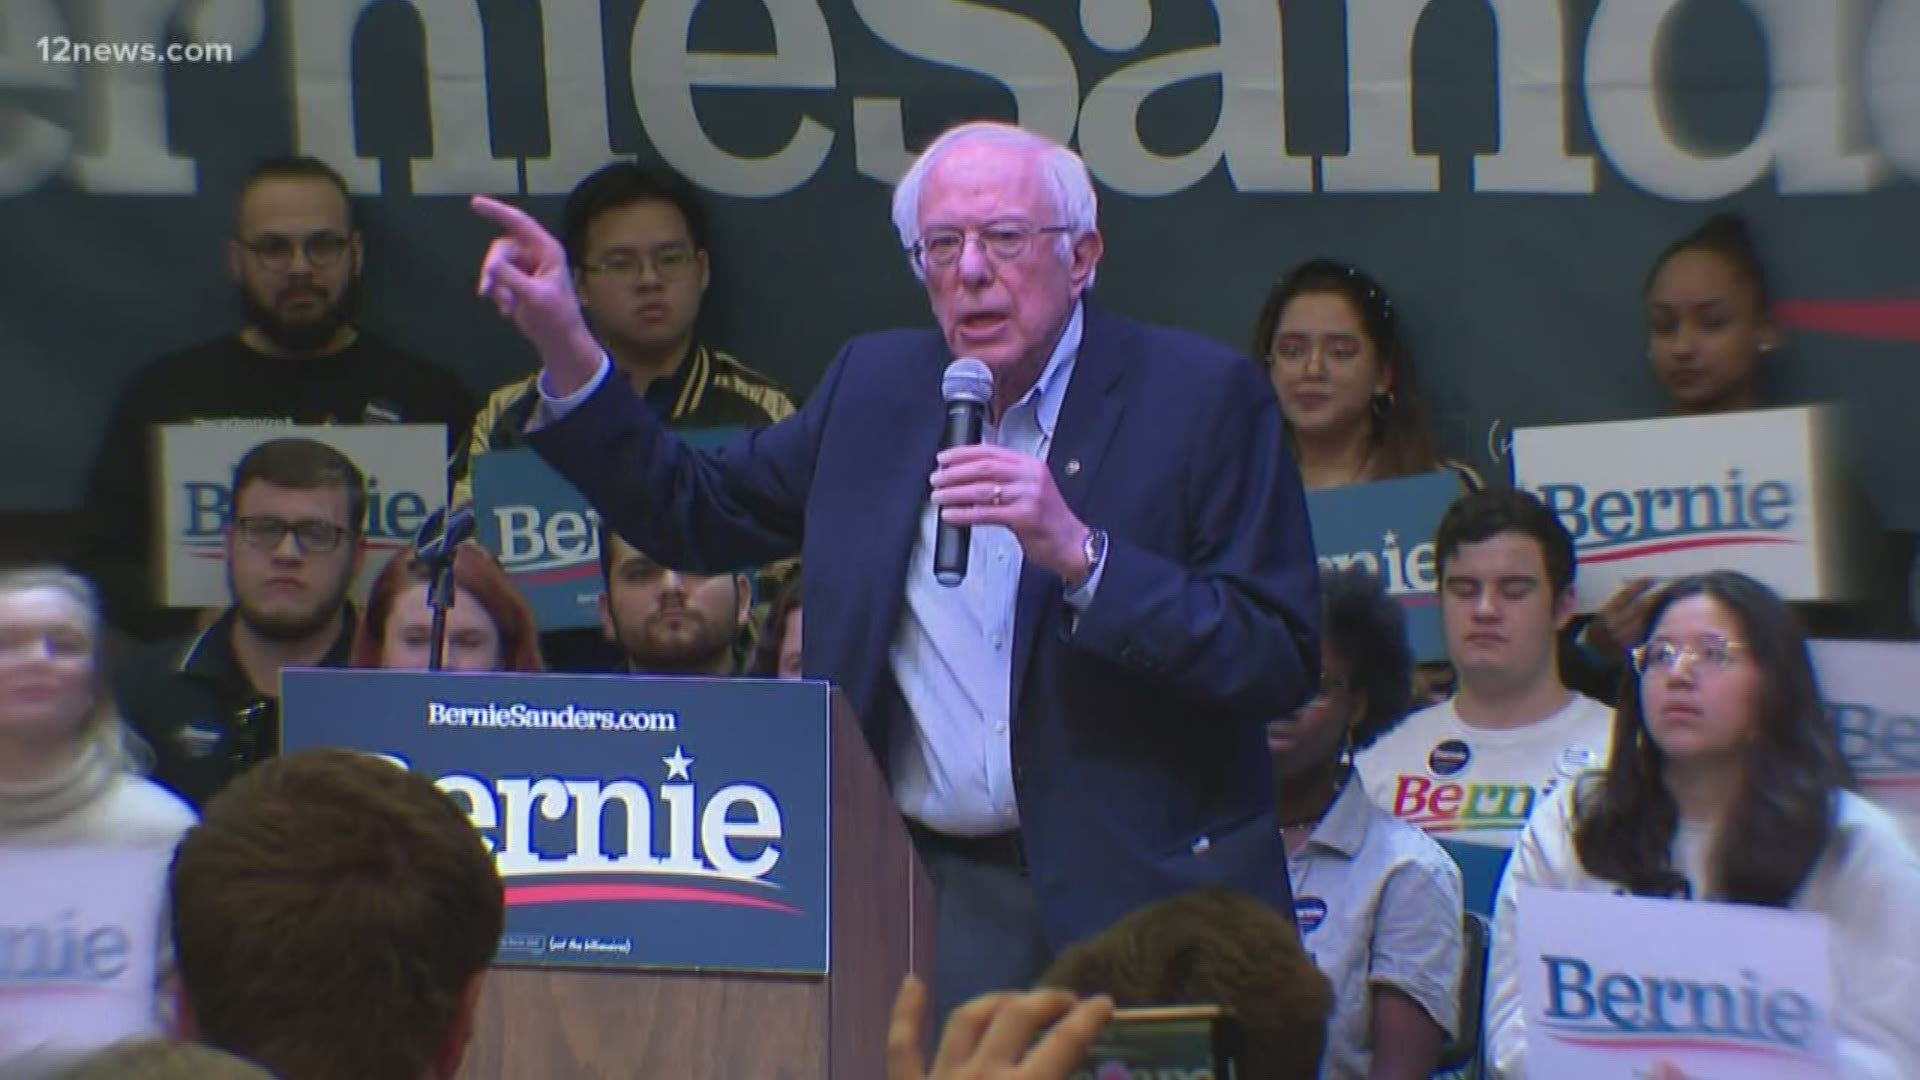 Bernie Sanders brought a message of party unity to his speeches in Iowa. However, crowd booing and attendee comments told a different story.